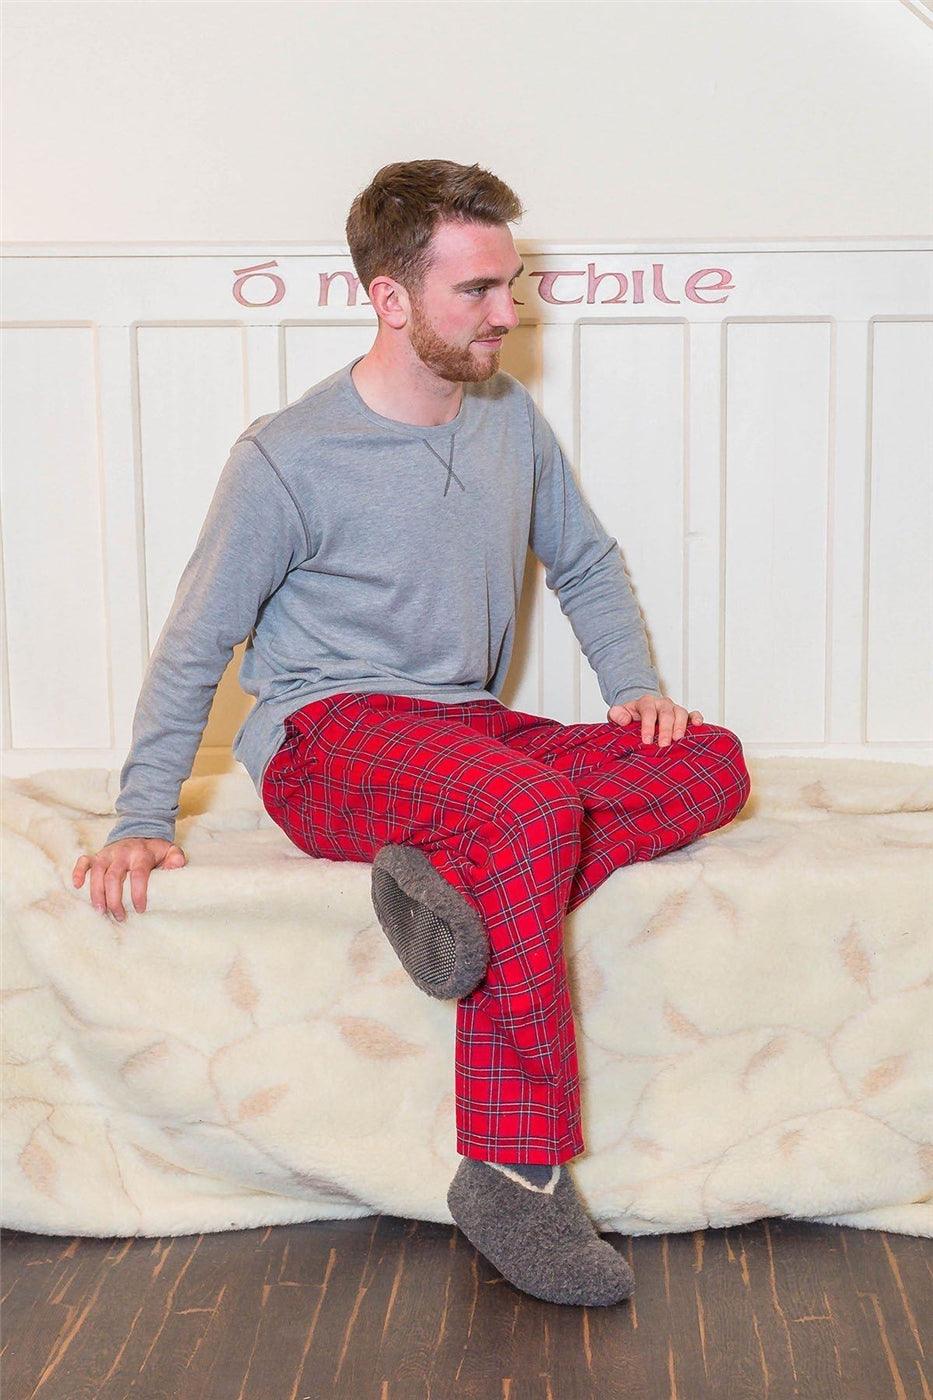 Lee Valley Flannel Lounge Pants - Red - No Generation